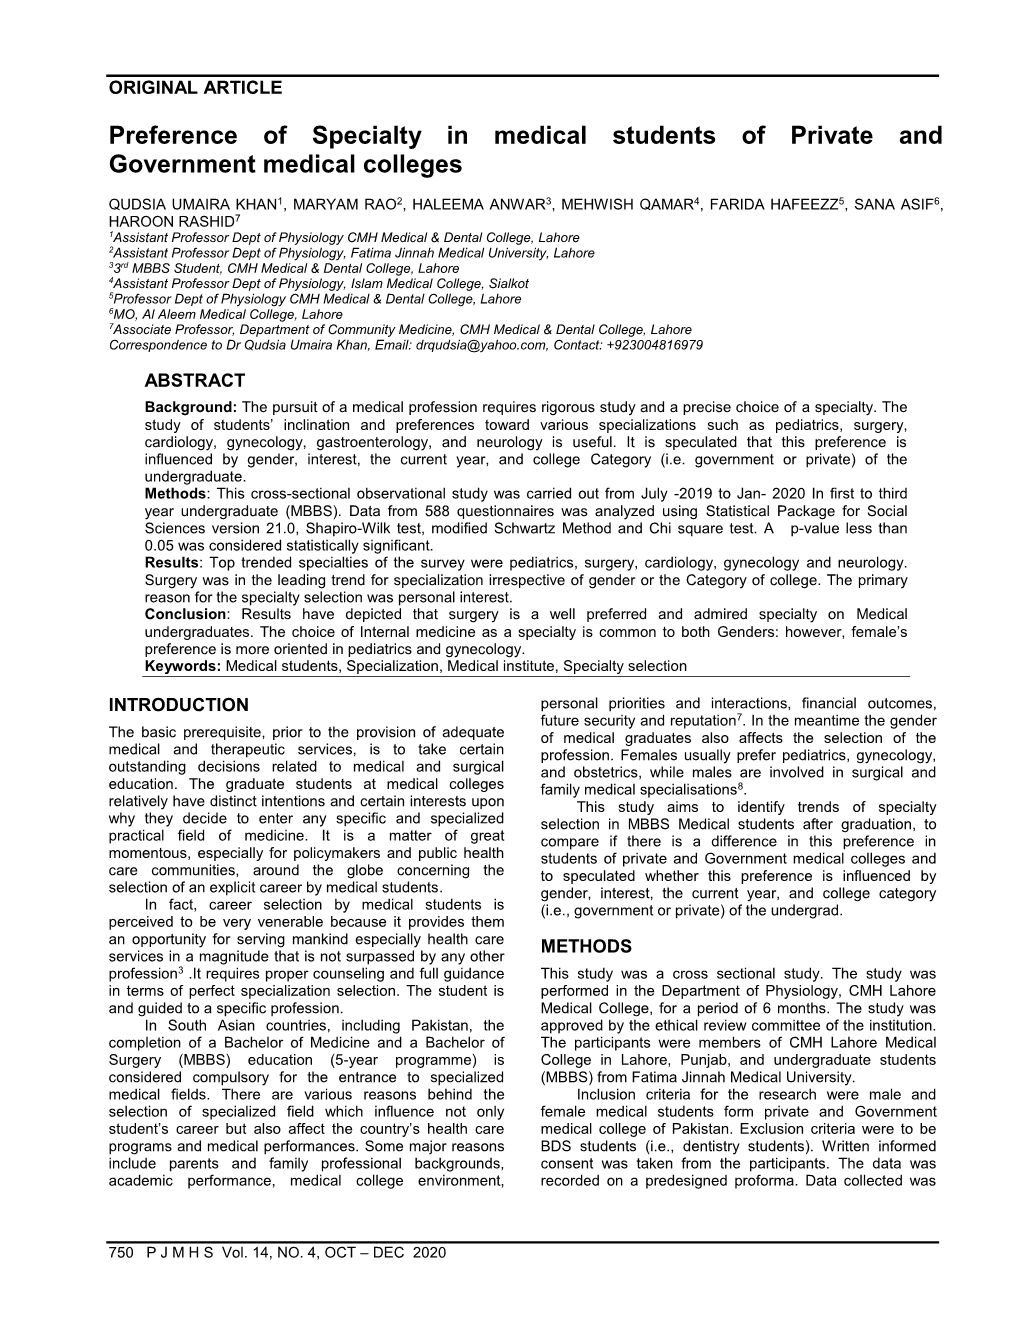 Preference of Specialty in Medical Students of Private and Government Medical Colleges